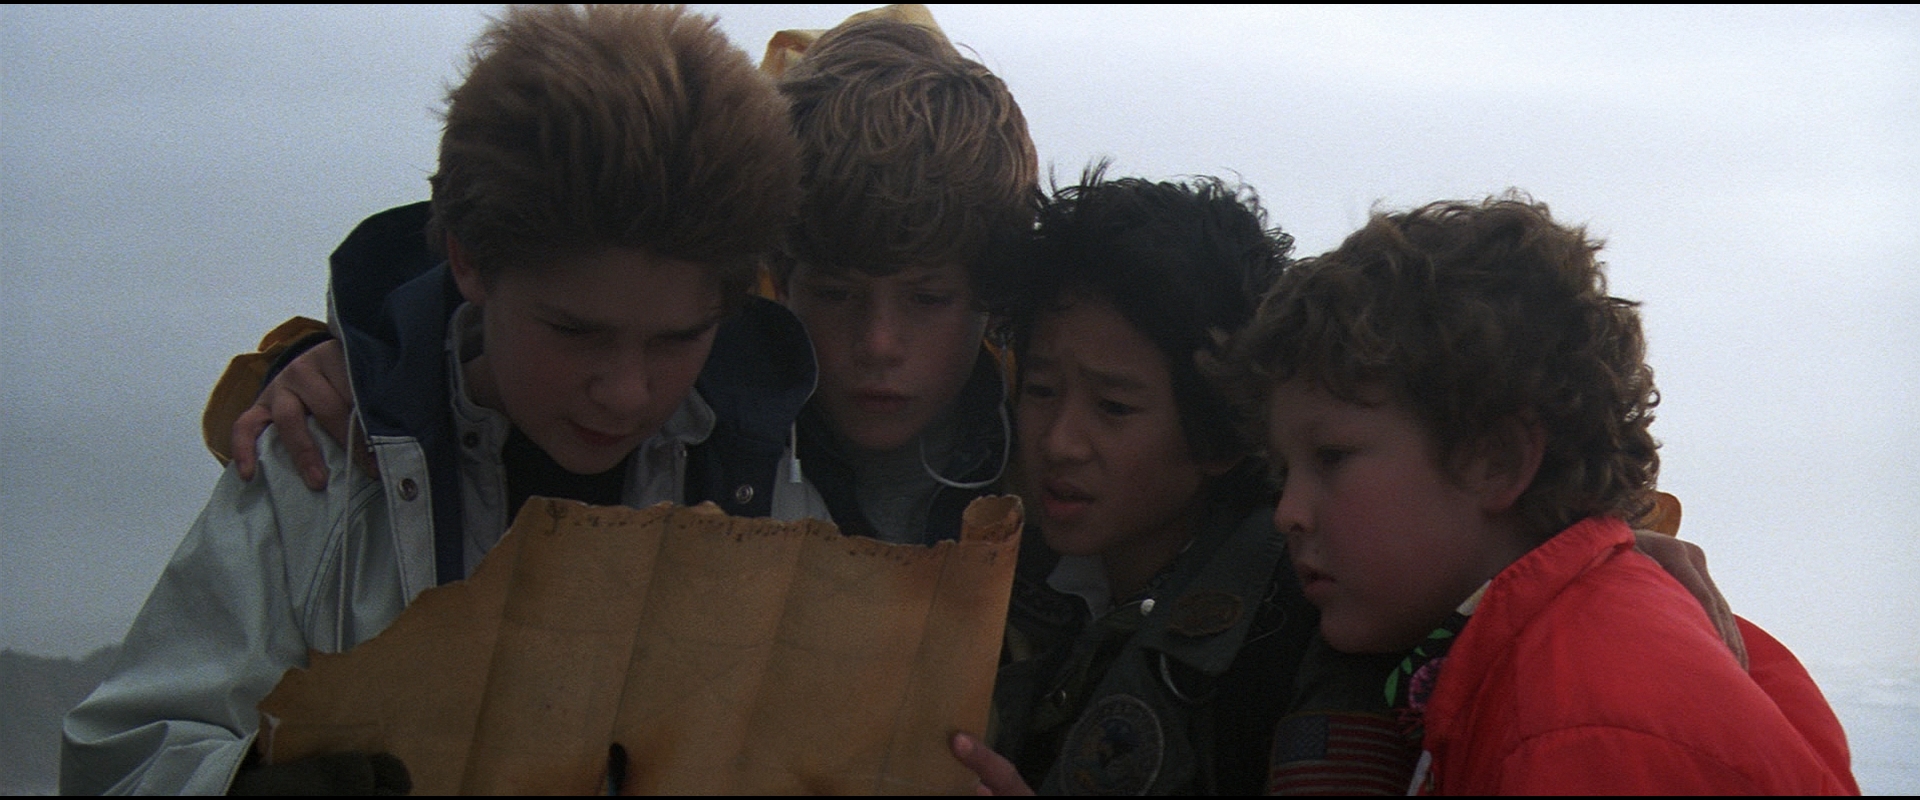 Movie The Goonies HD Wallpaper | Background Image